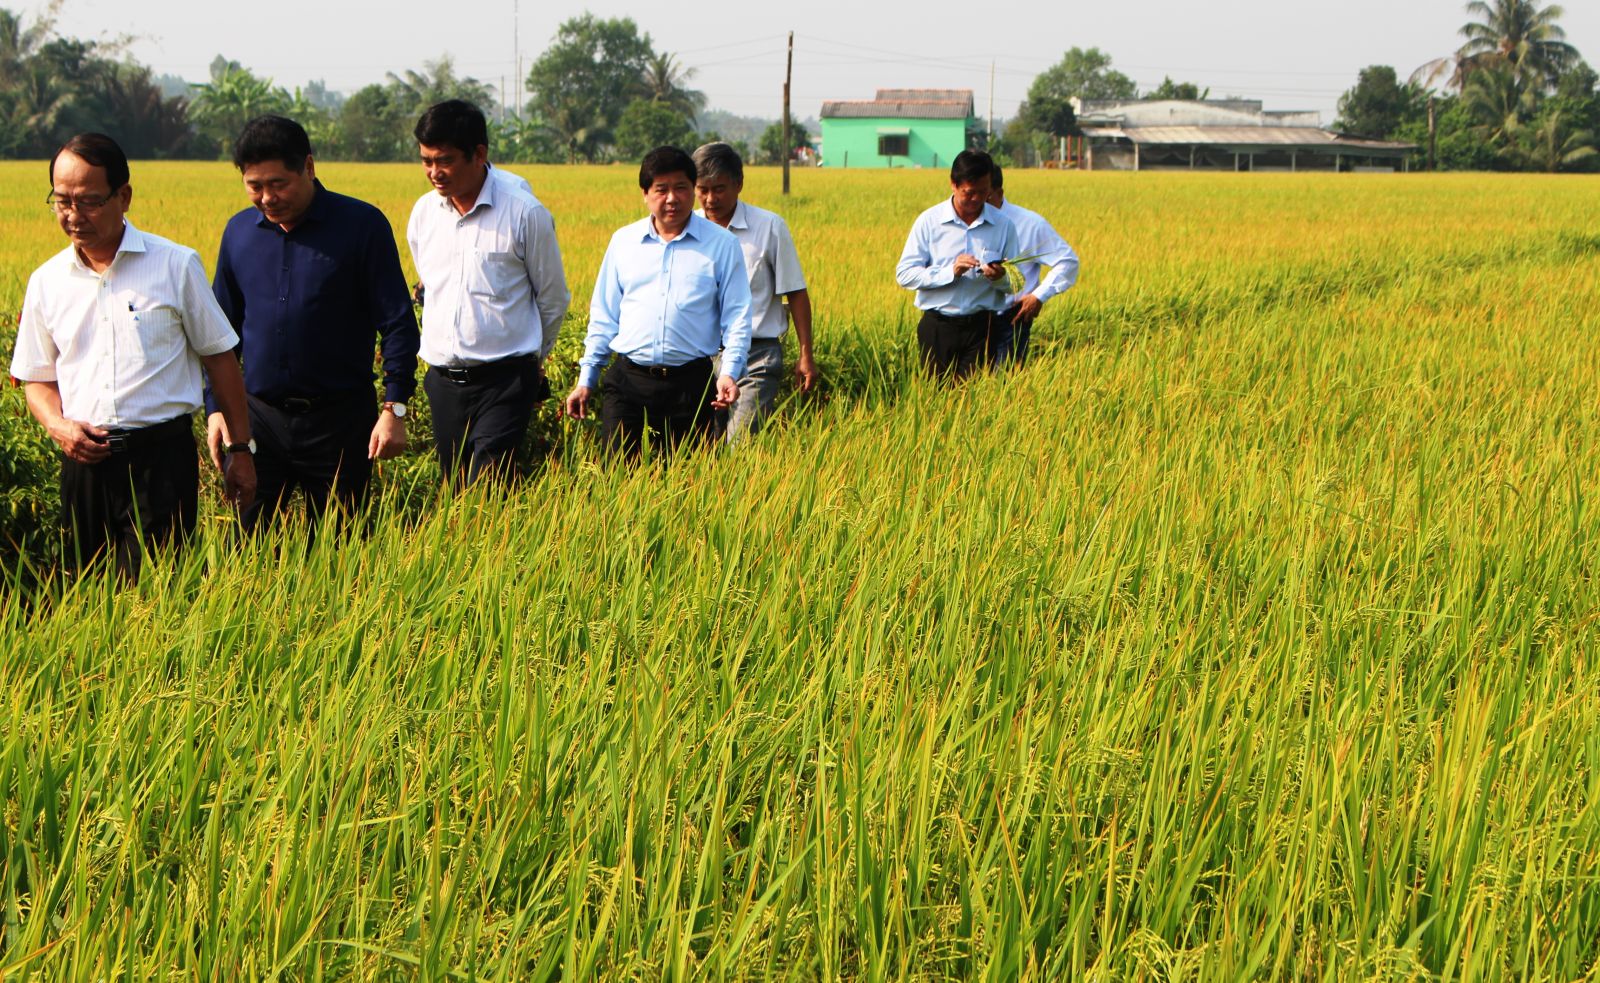 The mission of Ministry of Agriculture and Rural Development surveys rice fields in Tan Tru district, Long An province